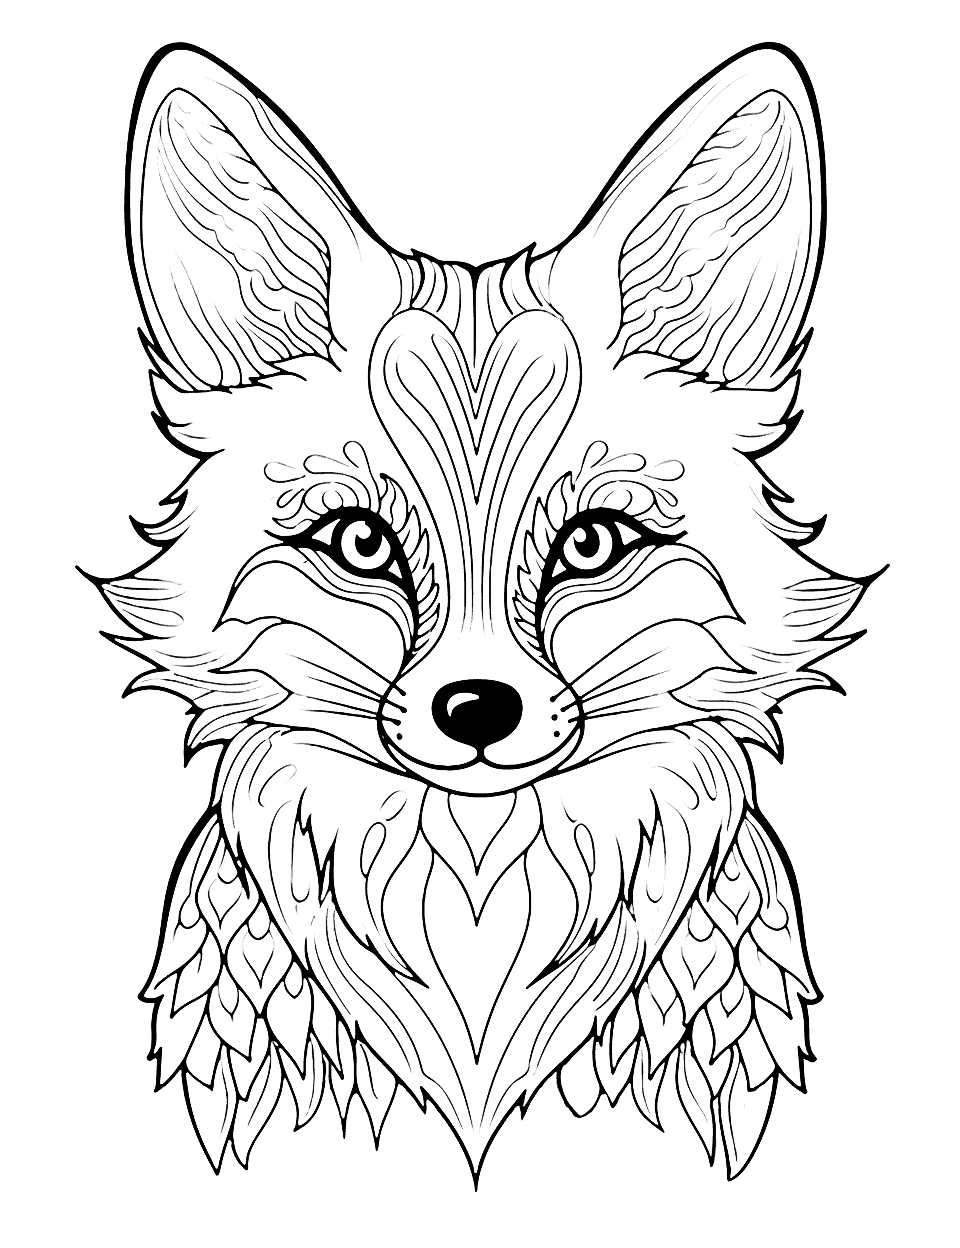 Detailed Fox Face Coloring Page - An up-close shot of a fox’s face, emphasizing its sharp features and intricate fur details.